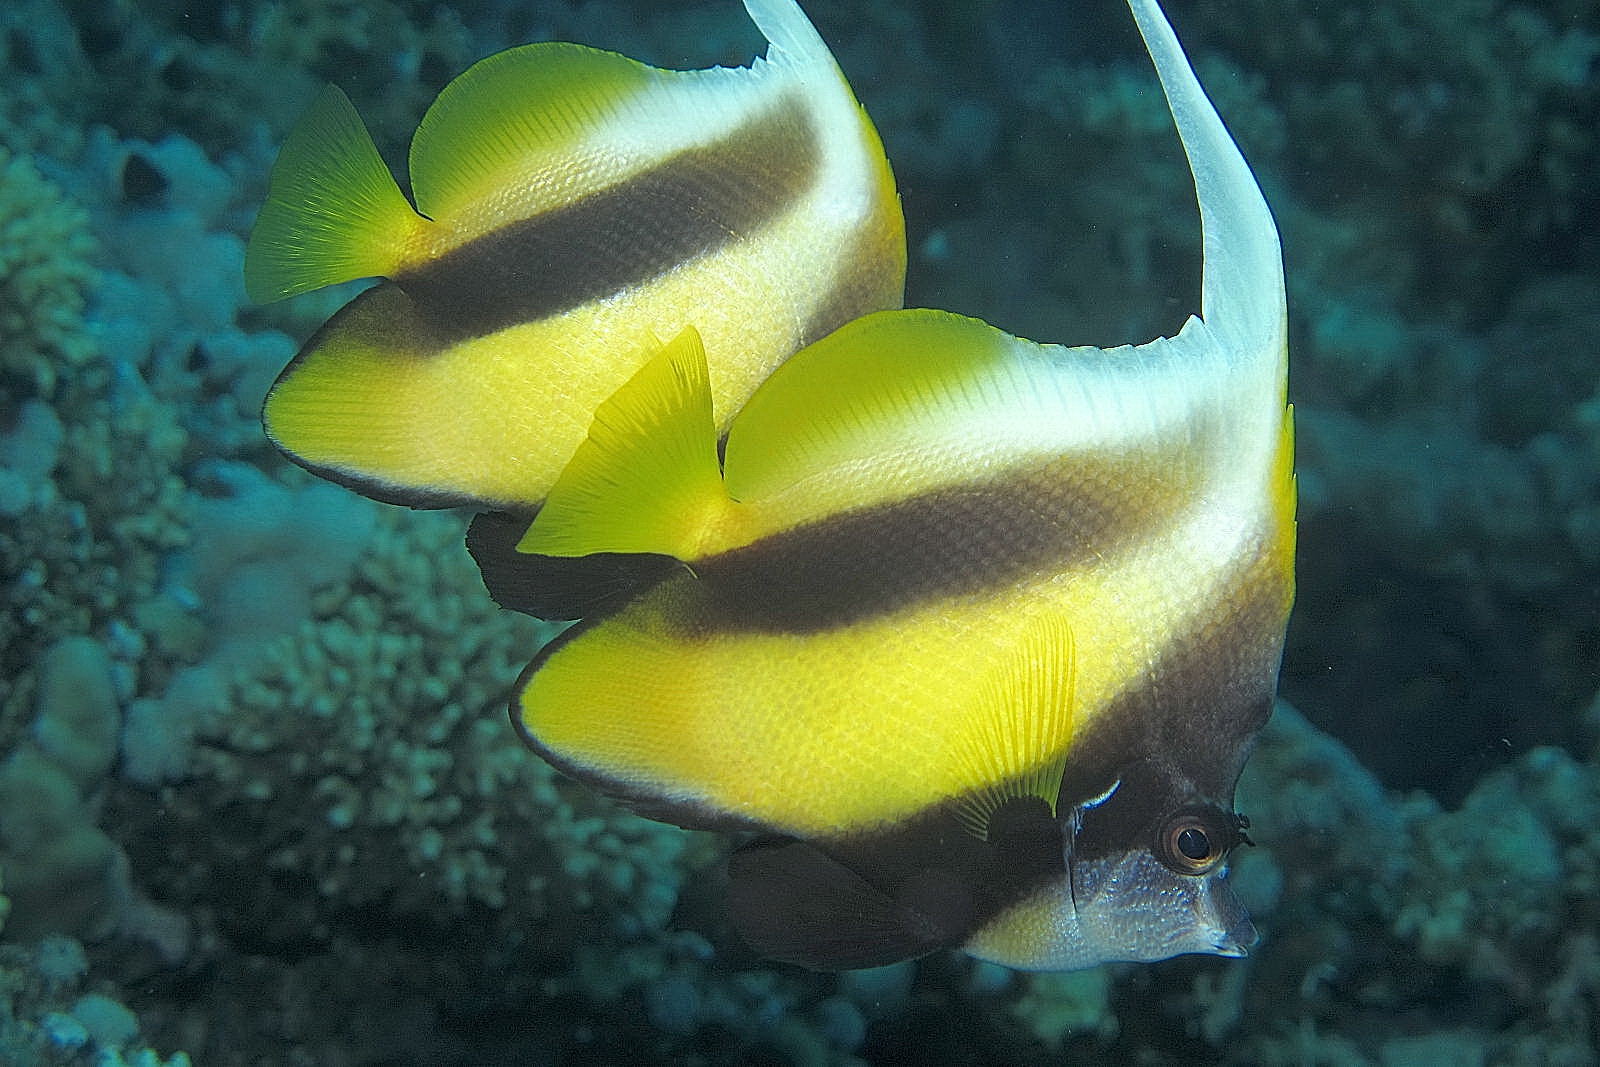 Butterfly flag pair - Woodhouse reef, Red Sea...